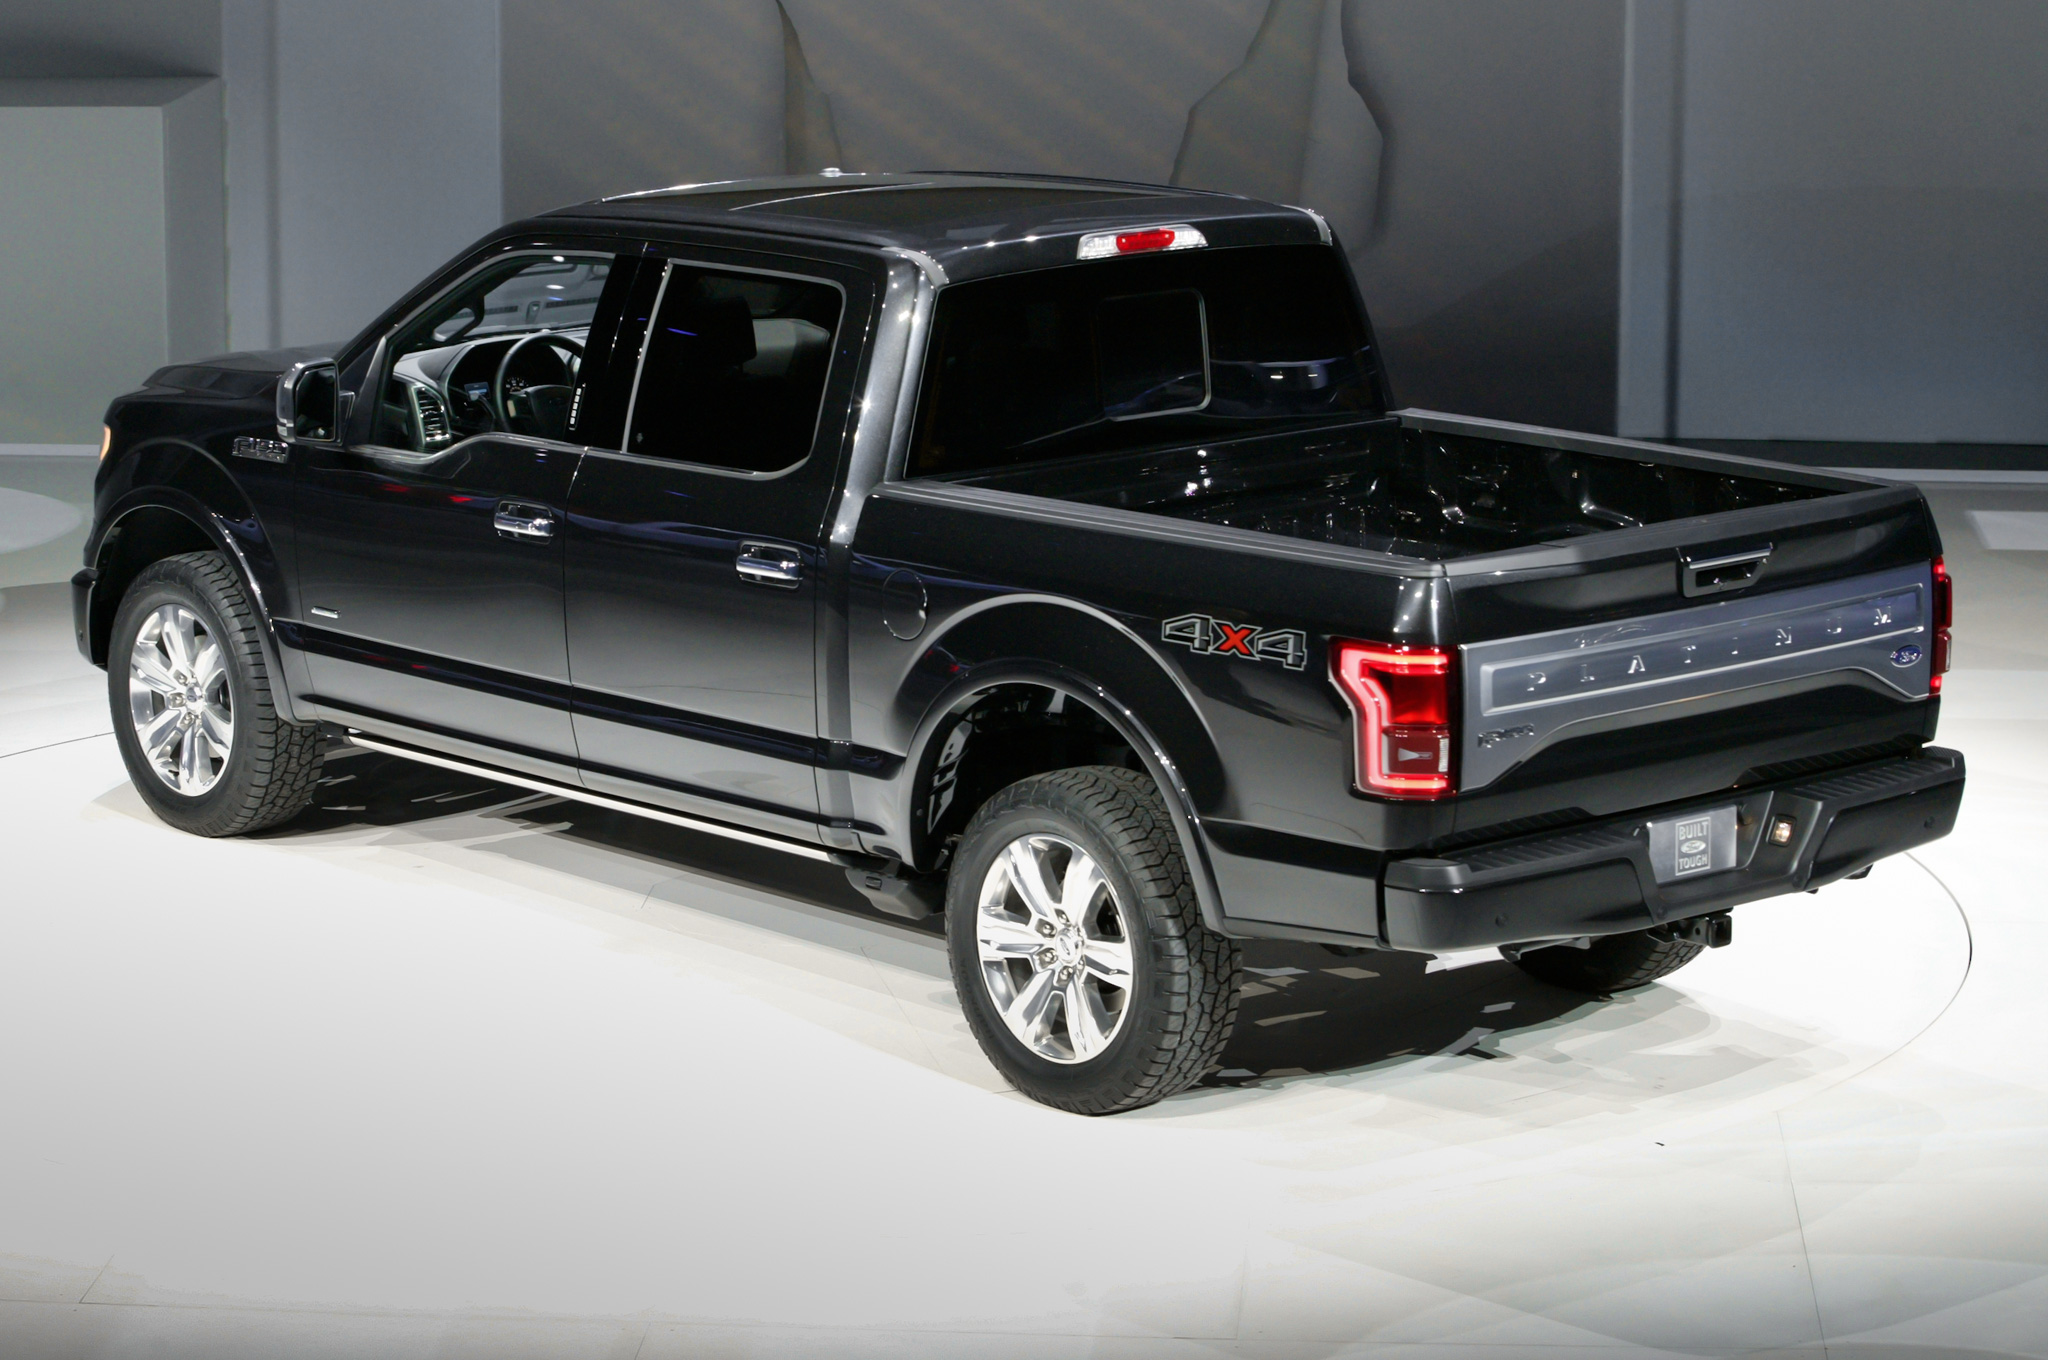 2015 Ford F-150 Backgrounds, Compatible - PC, Mobile, Gadgets| 2048x1360 px